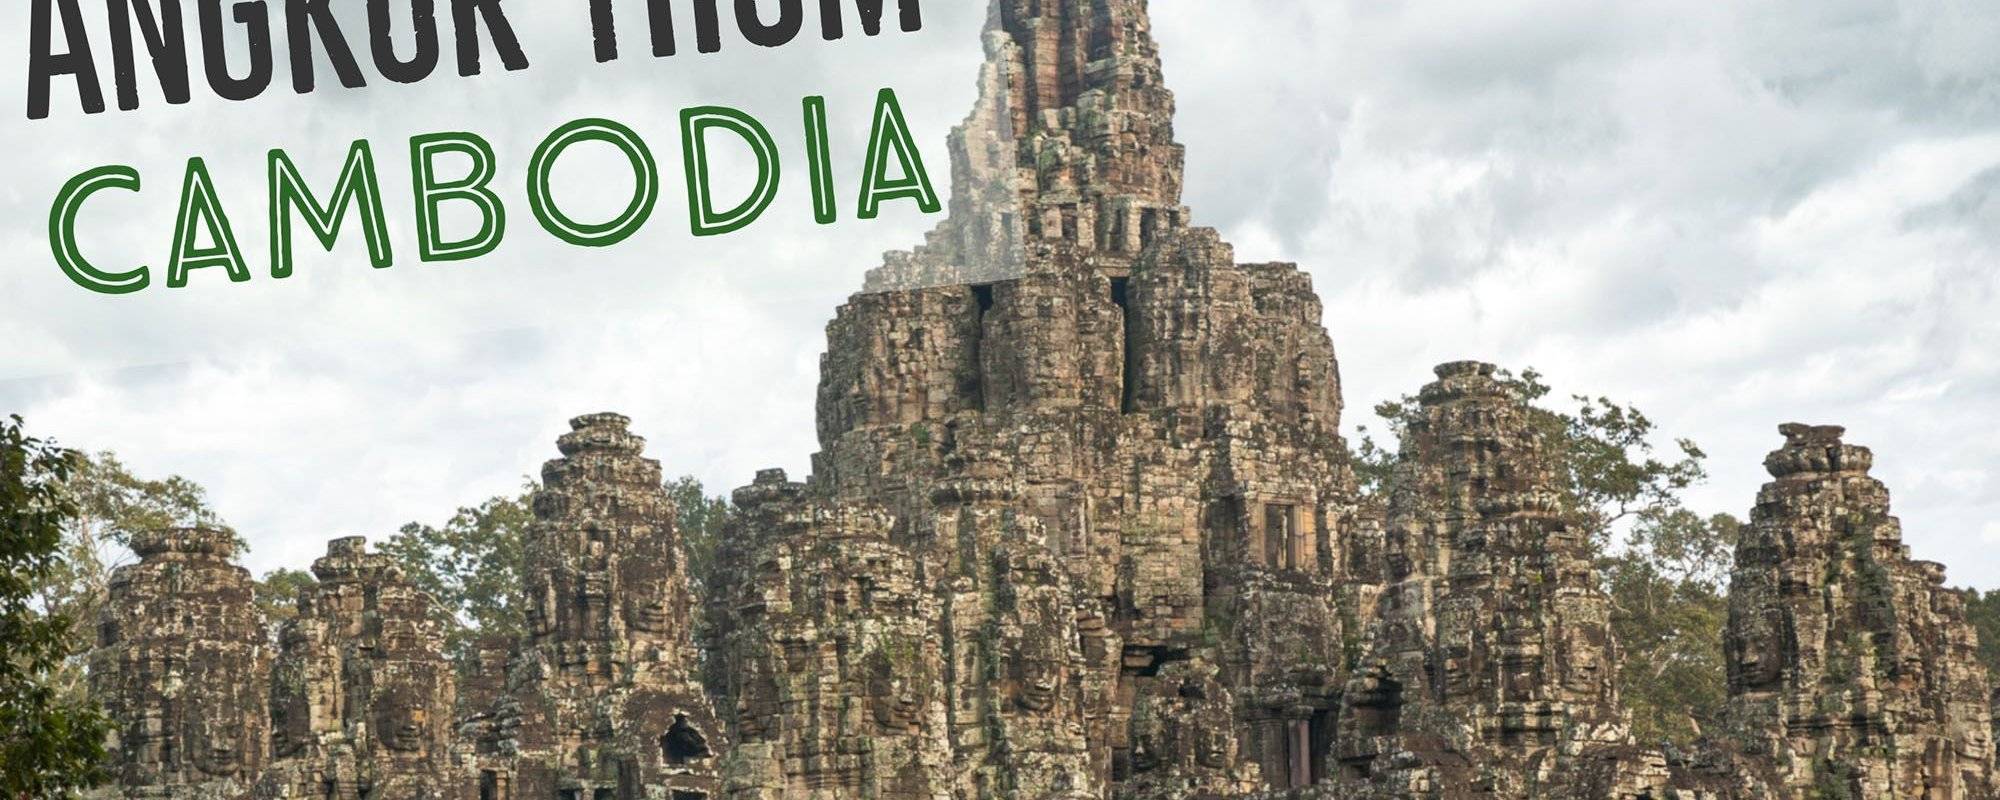 Angkor Thom And The Faces Of Bayon In Cambodia.